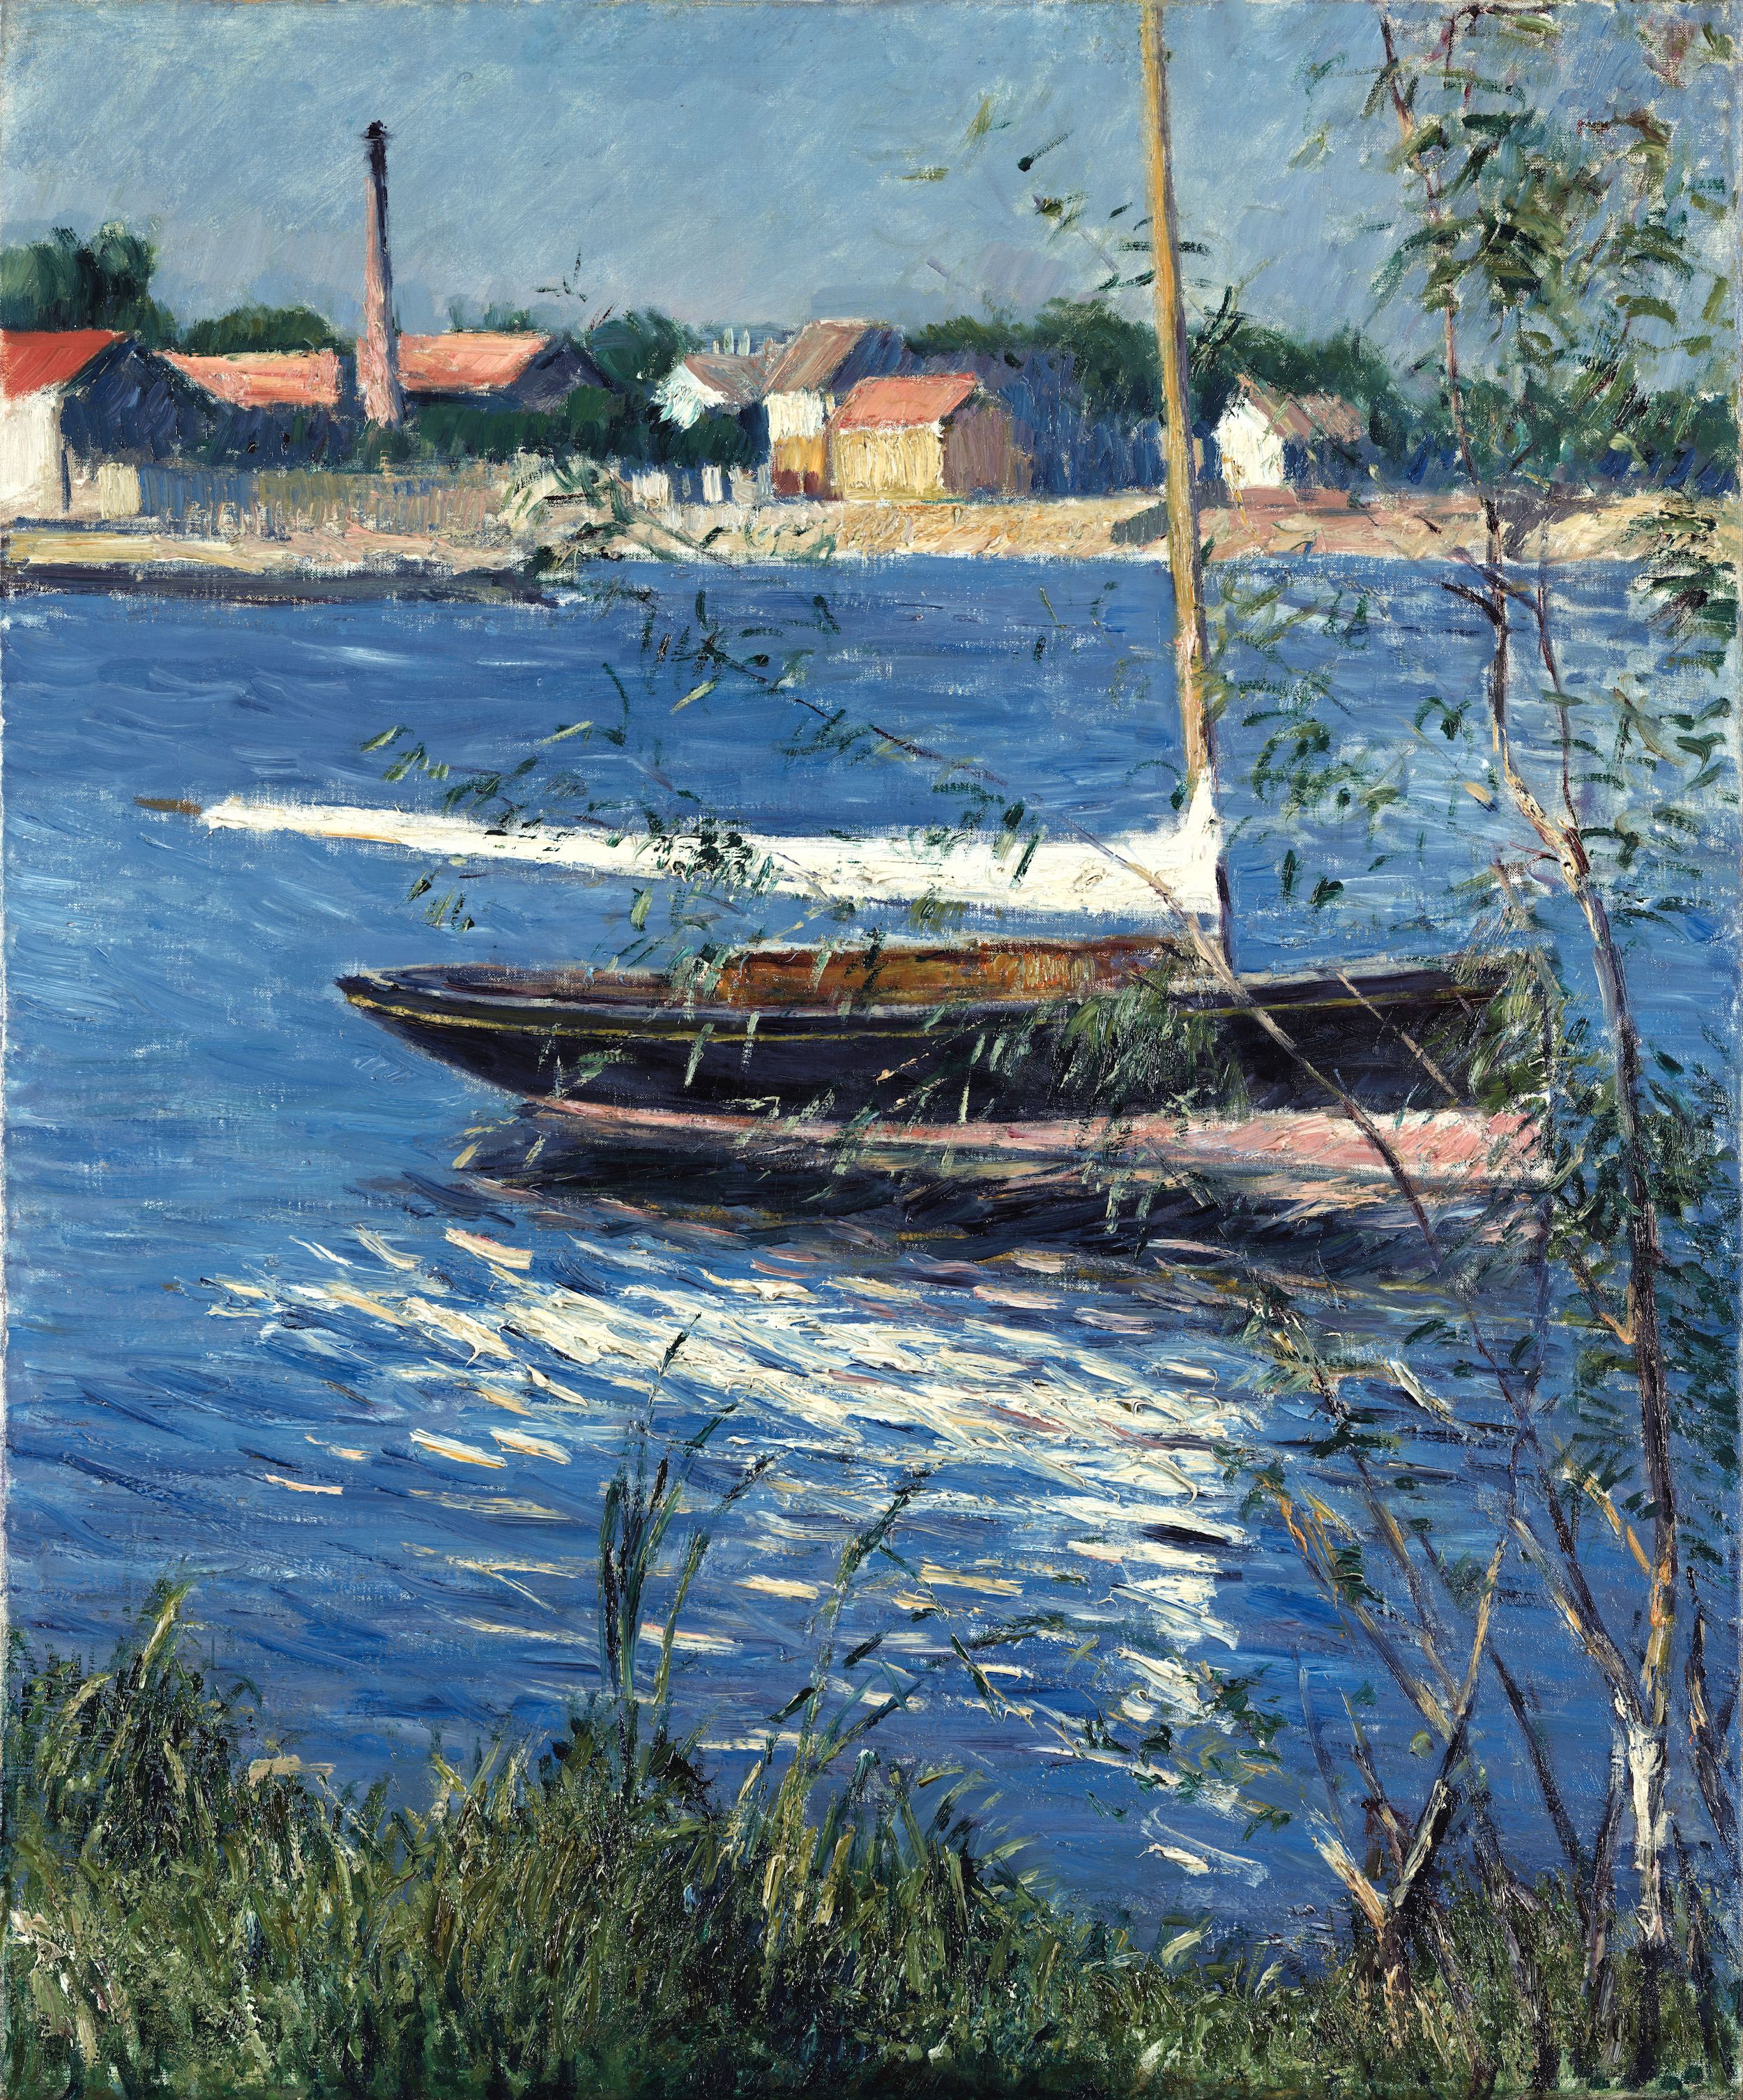 Boat Moored on the Seine at Argenteuil by Gustave Caillebotte - c. 1884 - 65.41 x 54.29 cm (unframed) Nelson-Atkins Museum of Art